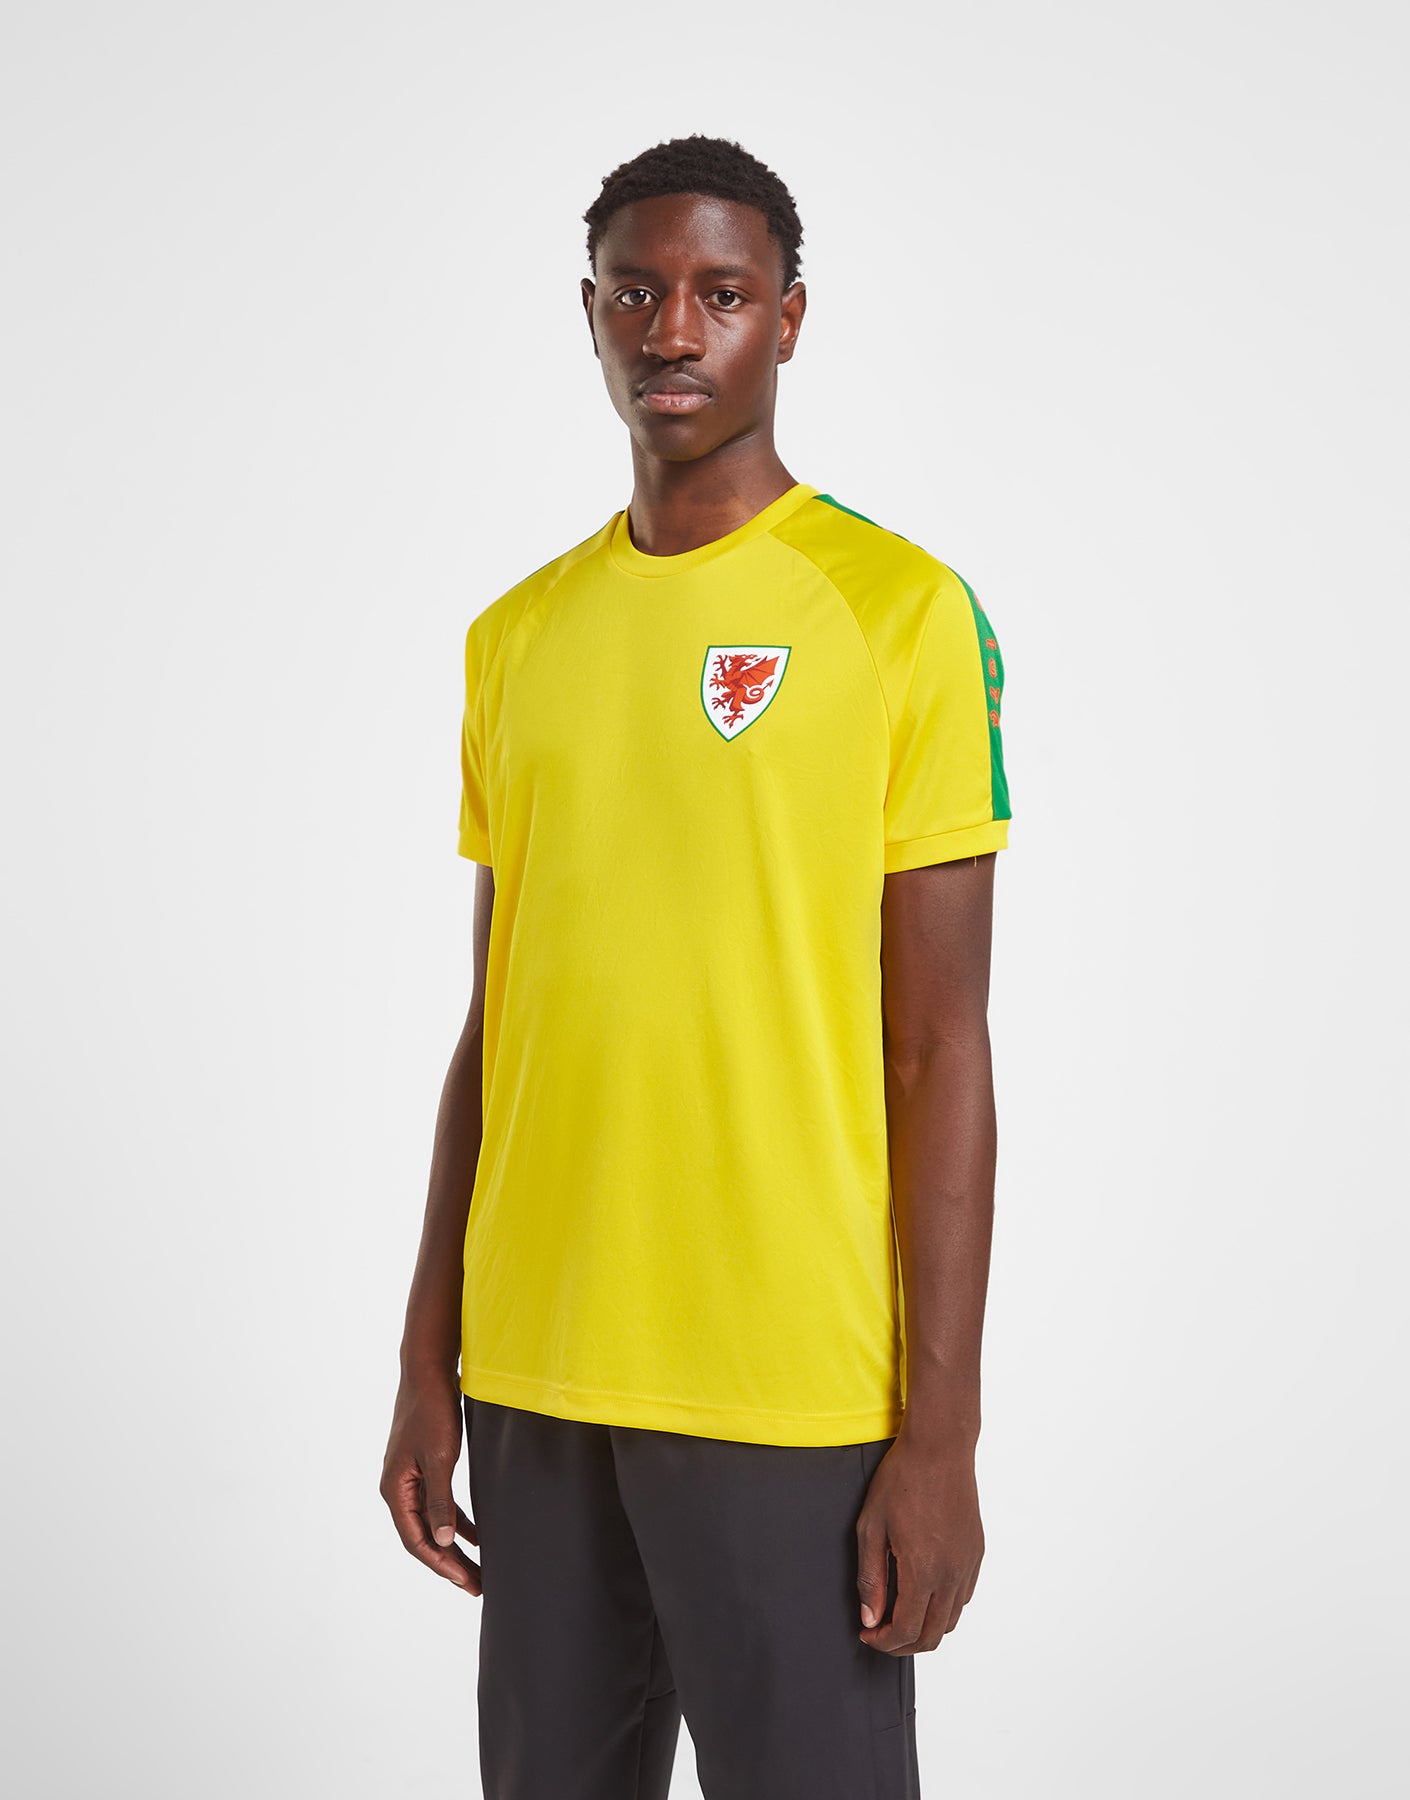 Official Team Wales Sleeve Print T-Shirt - Yellow - The World Football Store